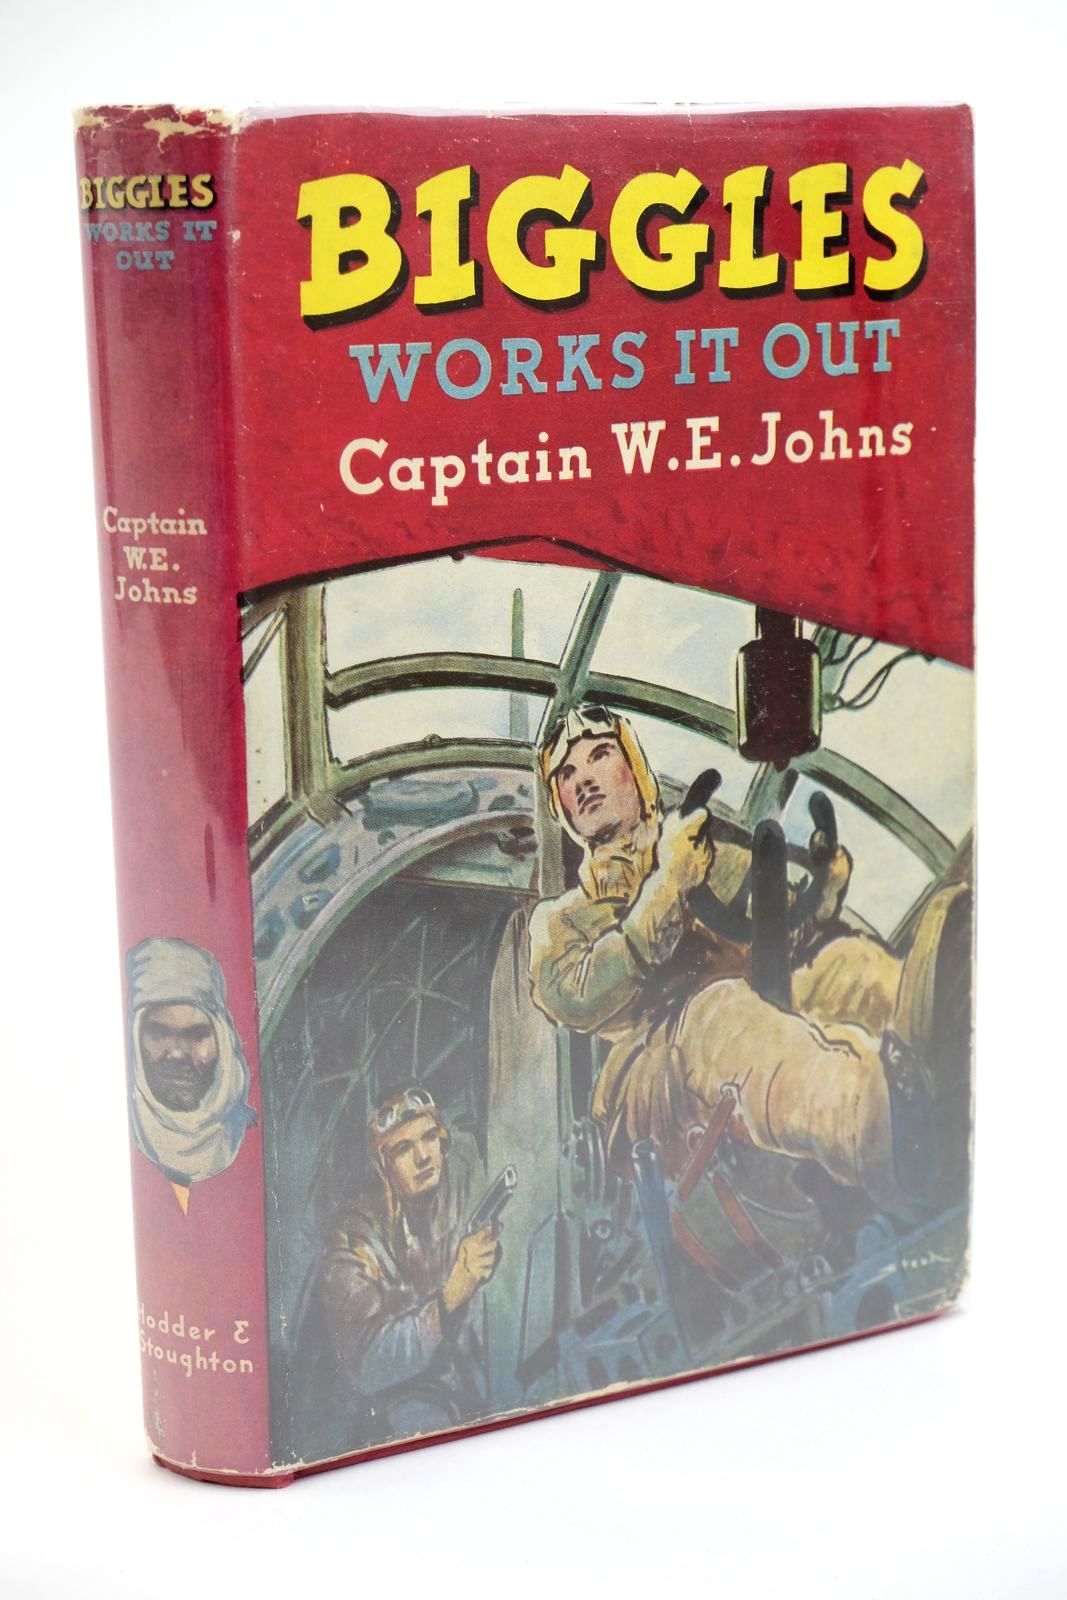 Photo of BIGGLES WORKS IT OUT written by Johns, W.E. illustrated by Stead,  published by Hodder & Stoughton (STOCK CODE: 1323256)  for sale by Stella & Rose's Books